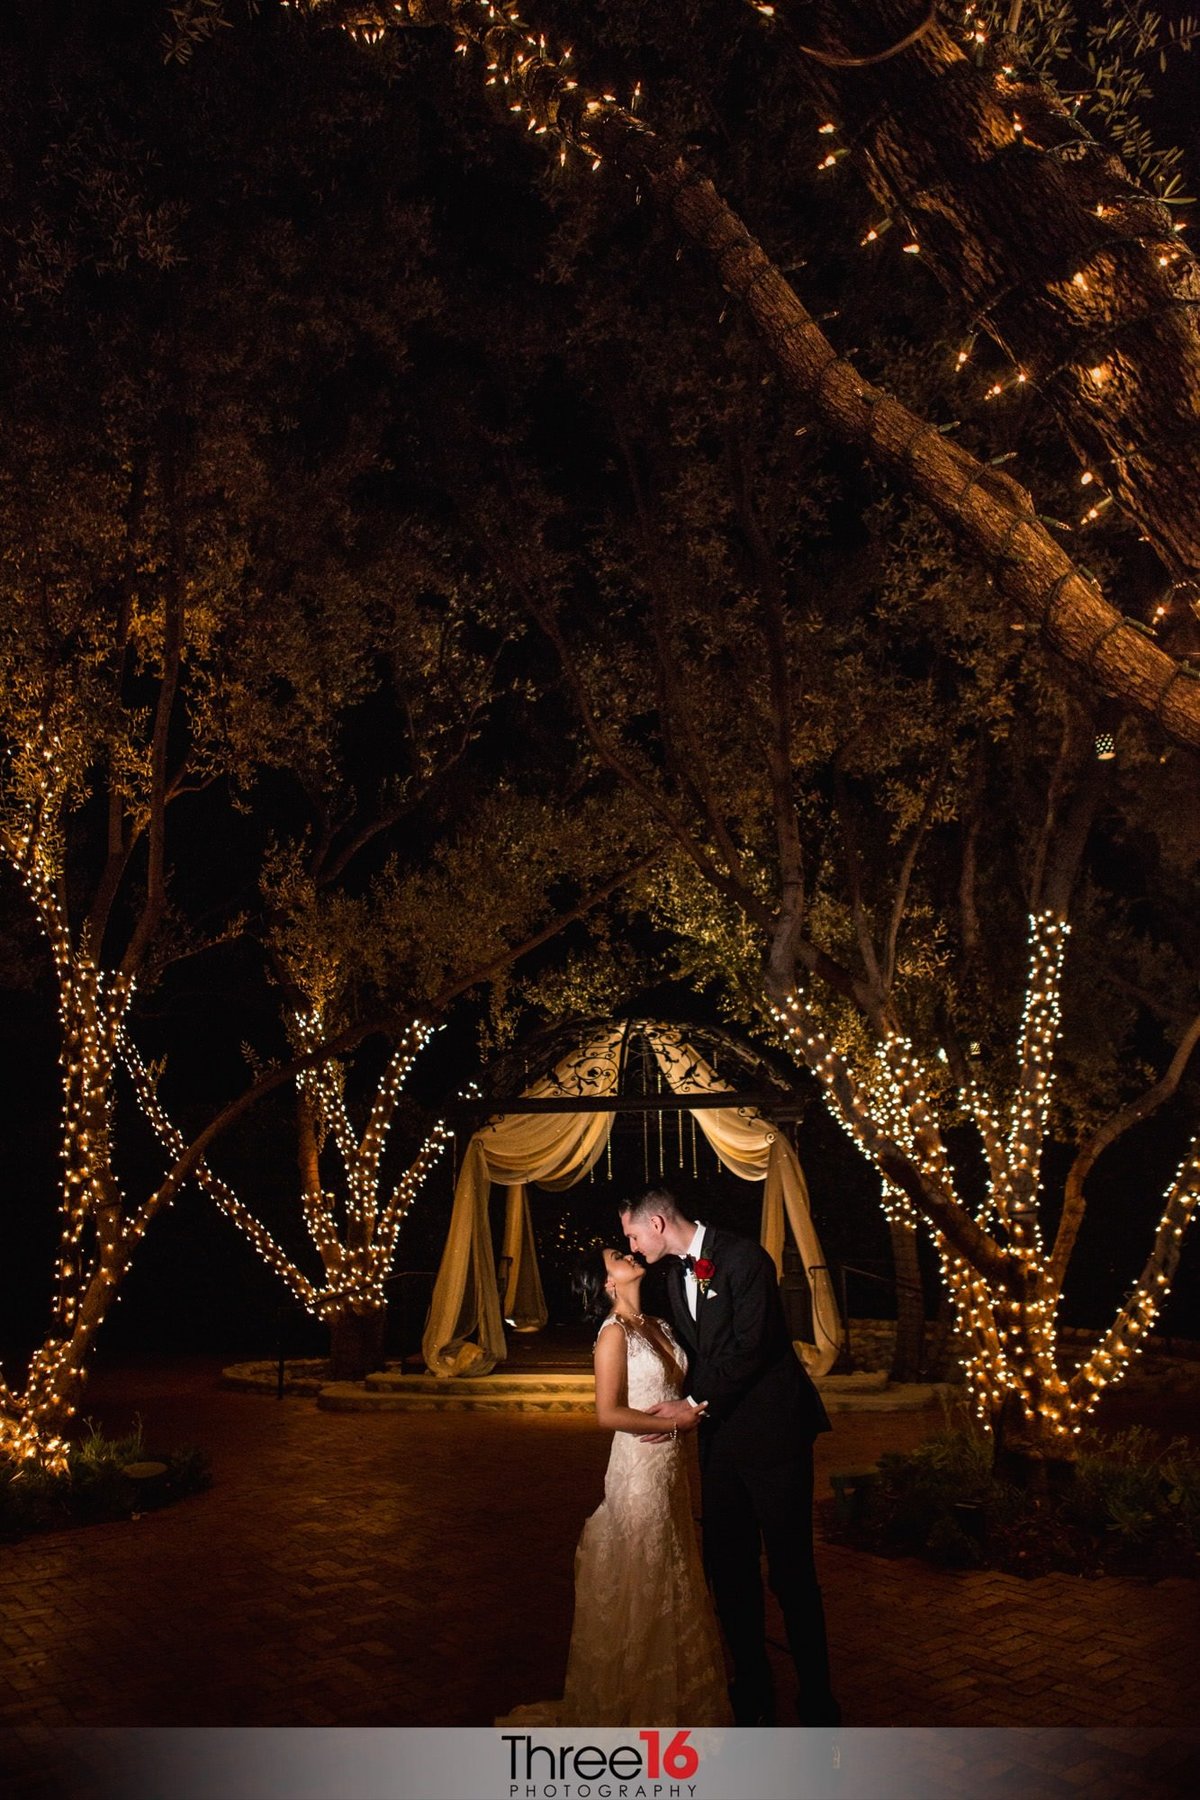 Beautiful night shot of Bride and Groom about to share a kiss together under the lighted trees